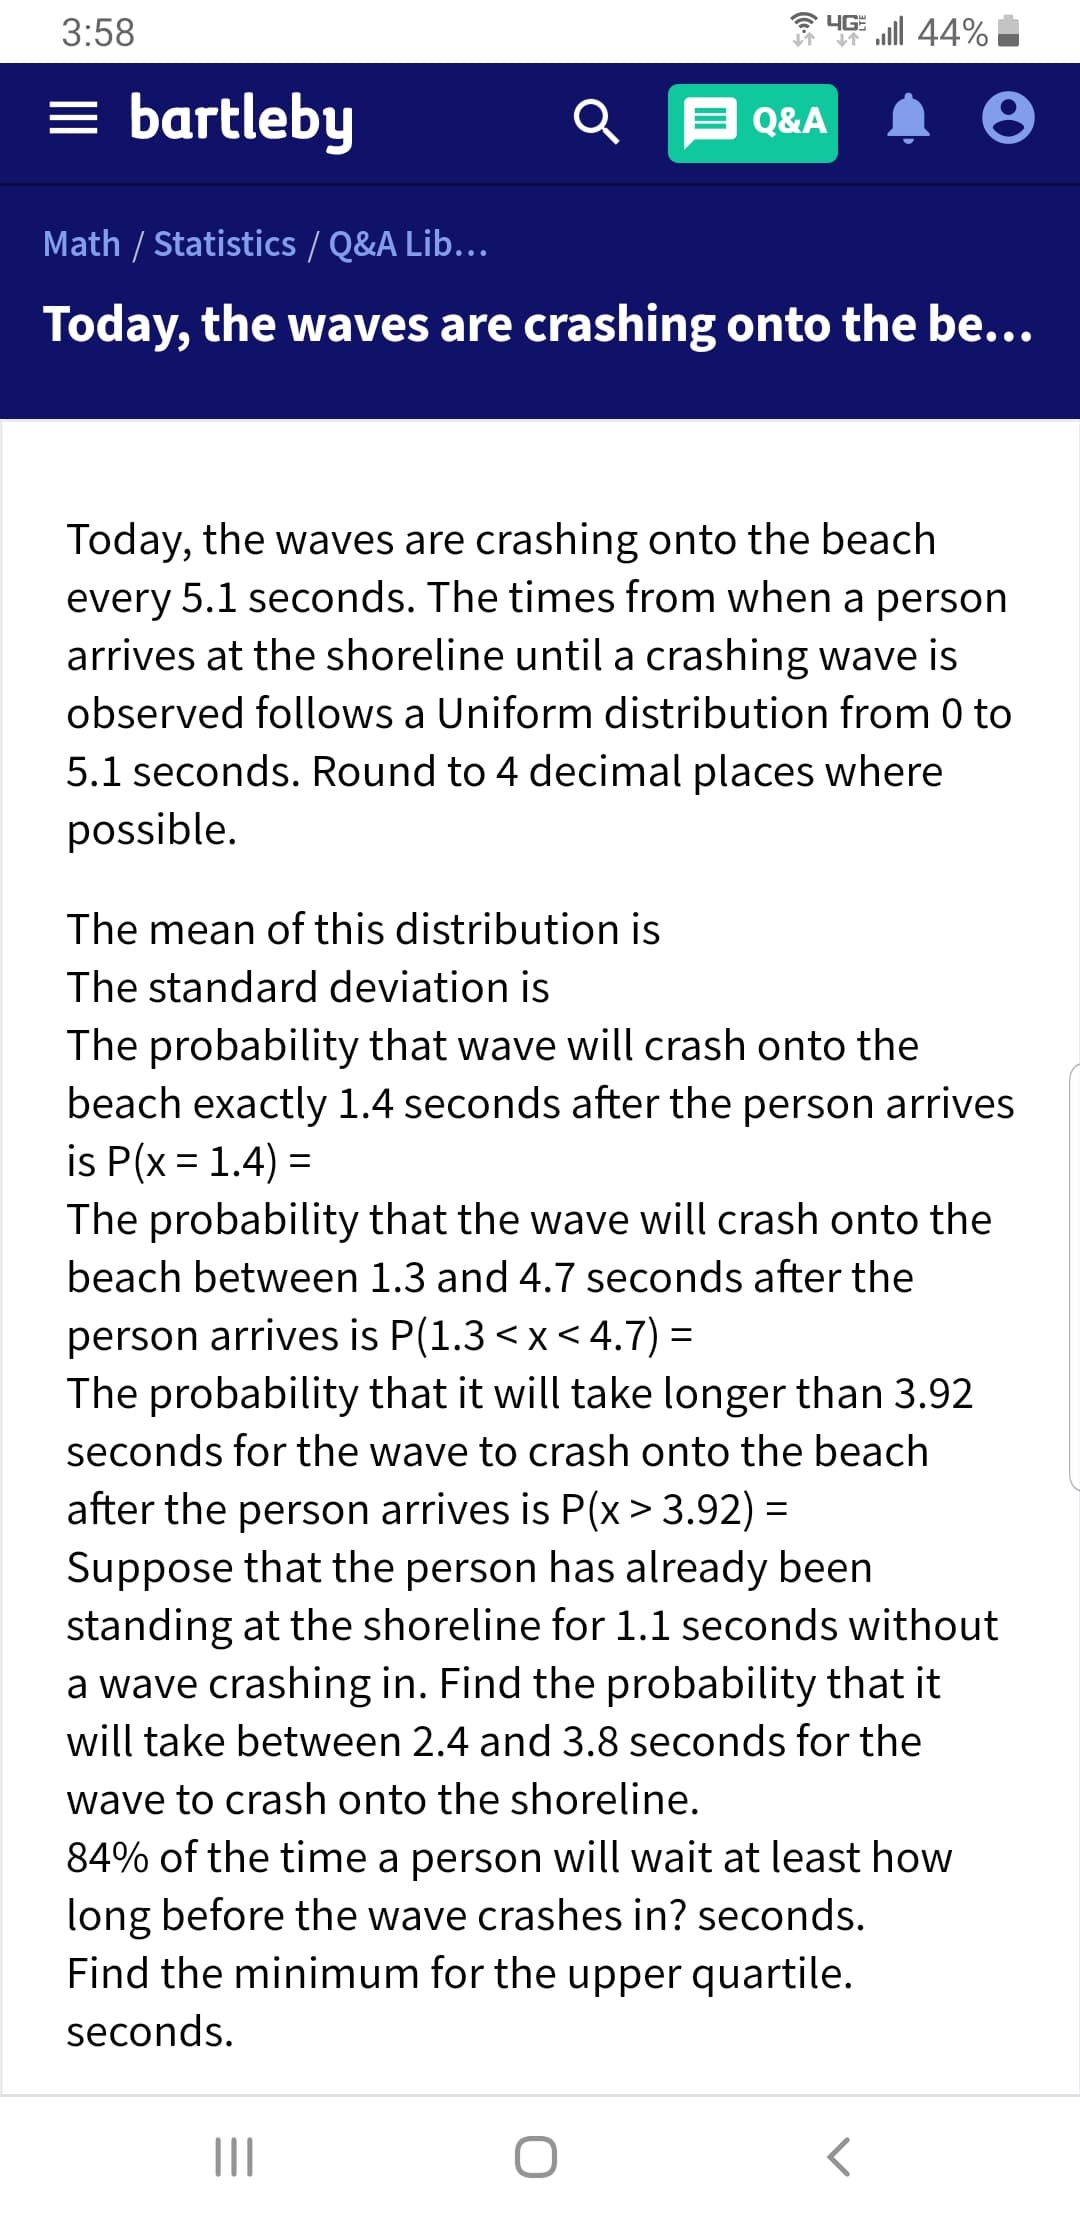 44%
3:58
bartleby
Q&A
Math / Statistics / Q&A Lib...
Today, the waves are crashing onto the be...
Today, the waves are crashing onto the beach
every 5.1 seconds. The times from when a person
arrives at the shoreline until a crashing wave is
observed follows a Uniform distribution from 0 to
5.1 seconds. Round to 4 decimal places where
possible.
The mean of this distribution is
The standard deviation is
The probability that wave will crash onto the
beach exactly 1.4 seconds after the person arrives
is P(x 1.4)
The probability that the wave will crash onto the
beach between 1.3 and 4.7 seconds after the
person arrives is P(1.3 < x < 4.7)
The probability that it will take longer than 3.92
seconds for the wave to crash onto the beach
after the person arrives is P(x> 3.92)
Suppose that the person has already been
standing at the shoreline for 1.1 seconds without
a wave crashing in. Find the probability that it
will take between 2.4 and 3.8 seconds for the
wave to crash onto the shoreline.
84% of the time a person will wait at least how
long before the wave crashes in? seconds
Find the minimum for the upper quartile.
seconds
